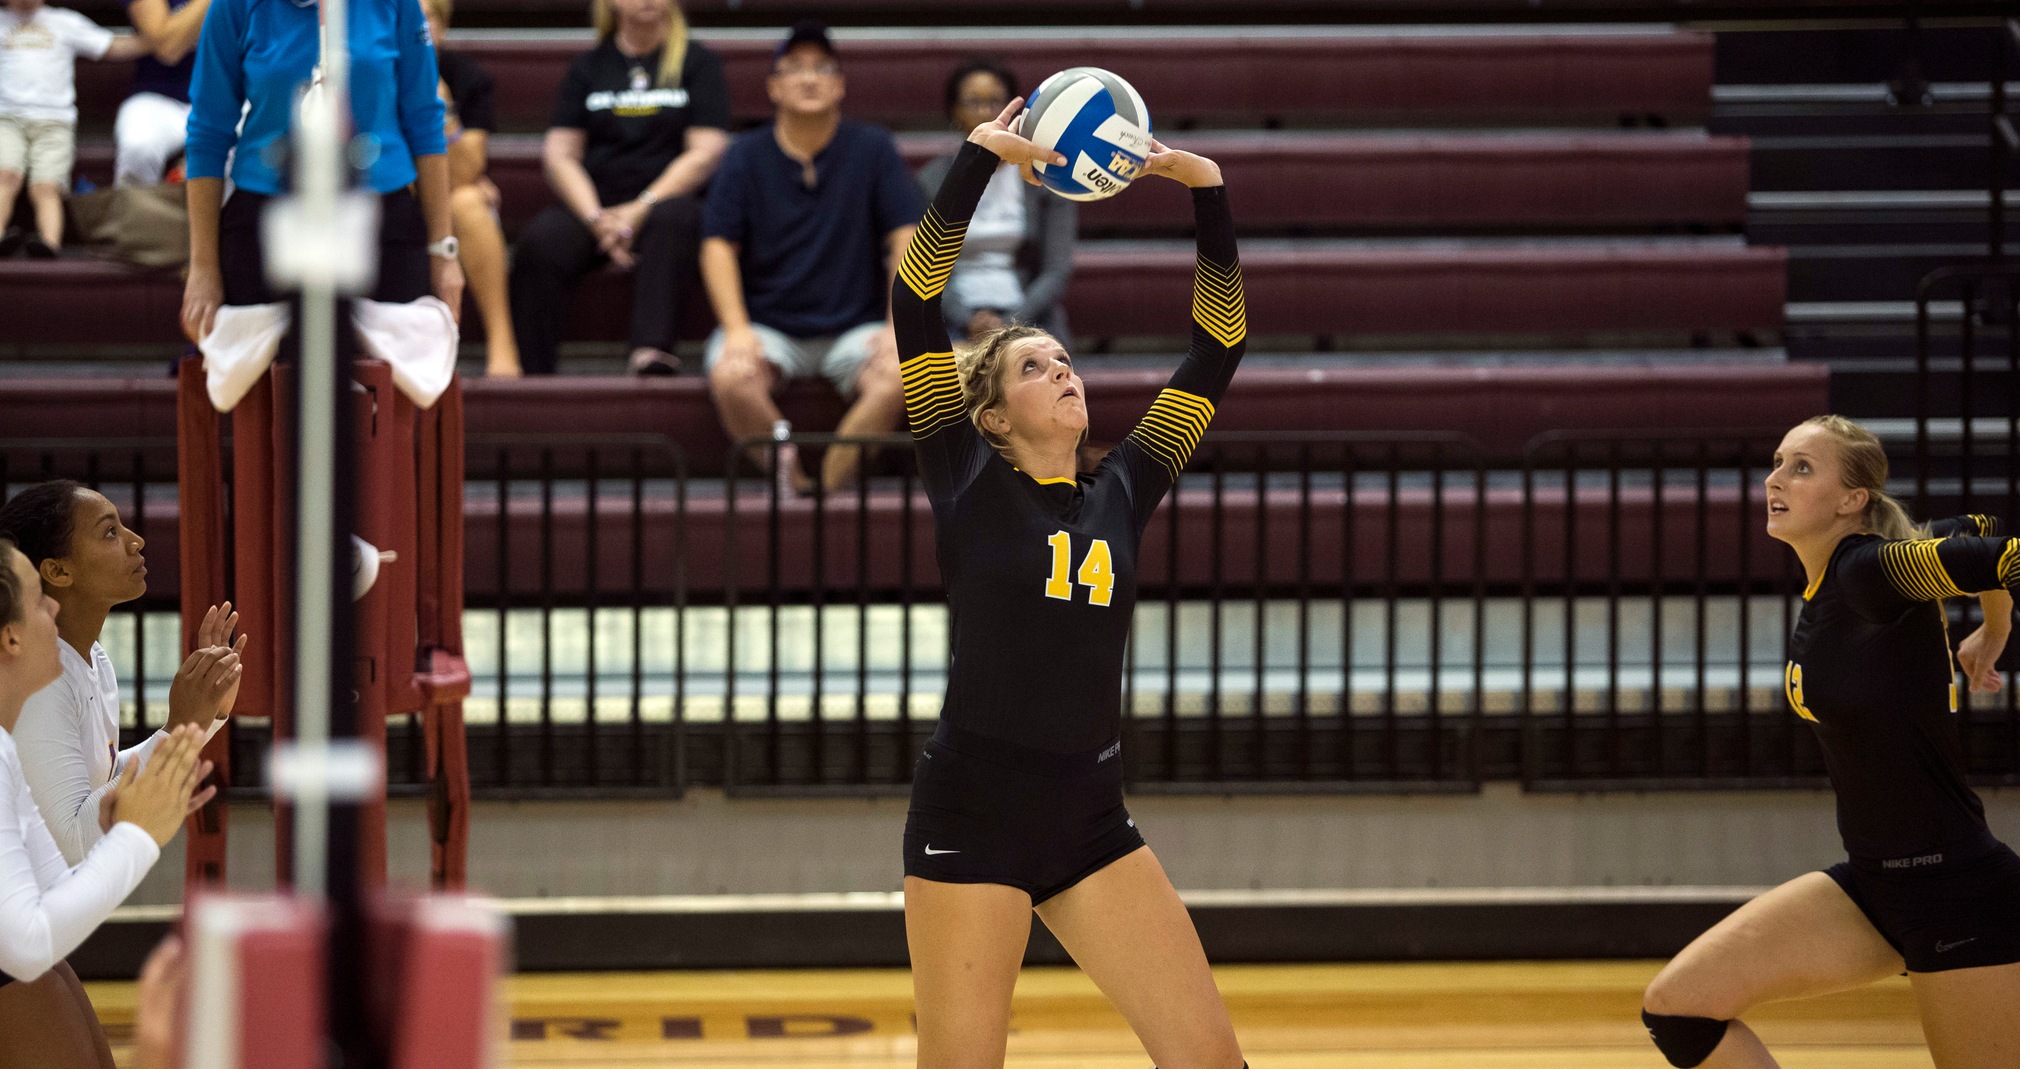 Morgan Windau counted 23 assists against the past two NCAA Division III champions.